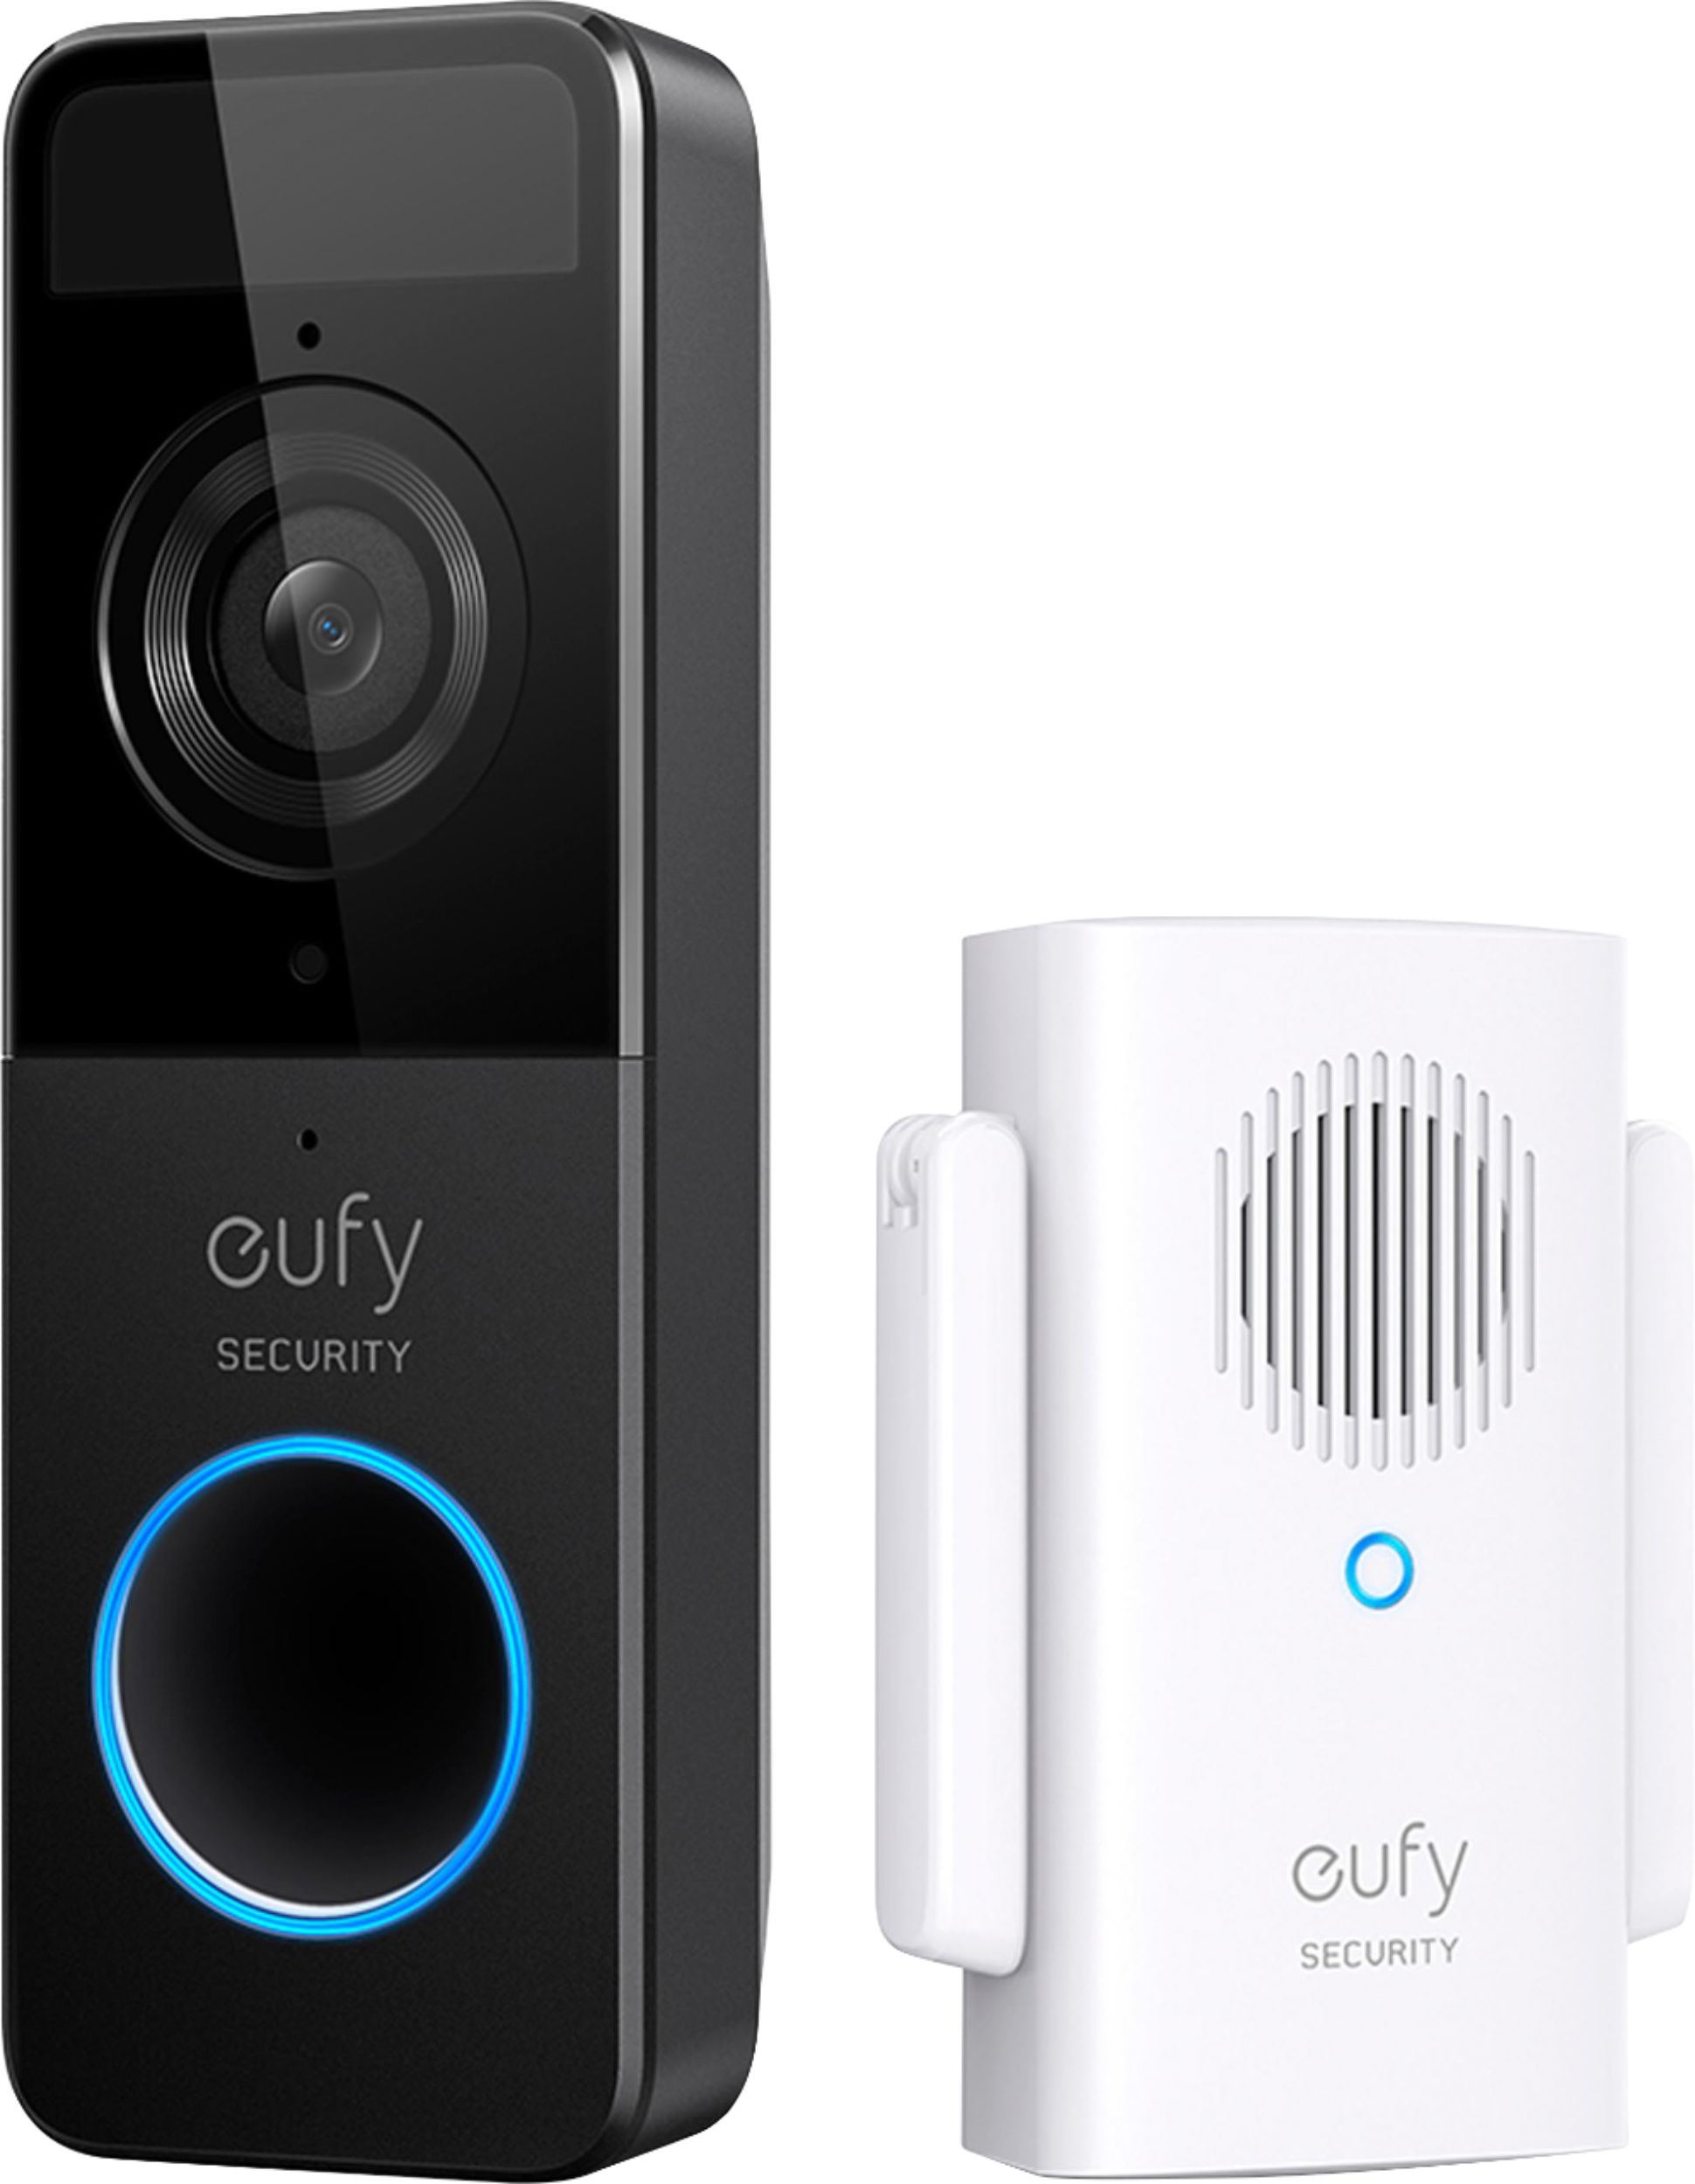 How to Reset Eufy Battery Doorbell: A Step-by-Step Guide